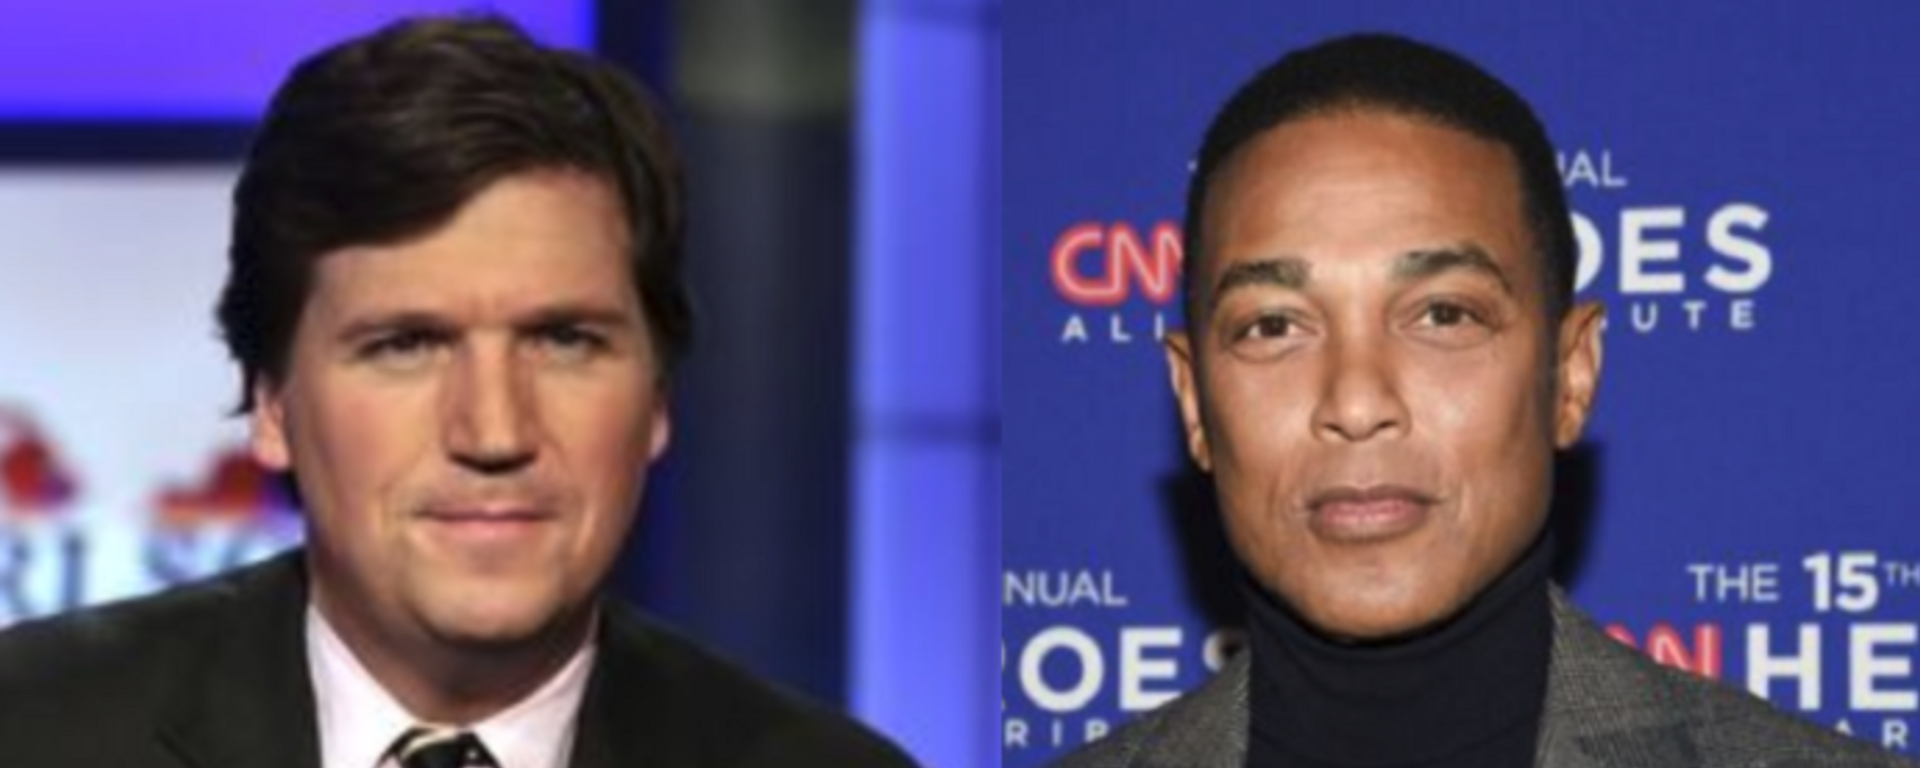 Collage image capturing CNN's Don Lemon and Fox News' Tucker Carlson. News broke on April 24, 2023, within hours of each other that both media figures had been let go by their respective employers. - Sputnik International, 1920, 26.04.2023